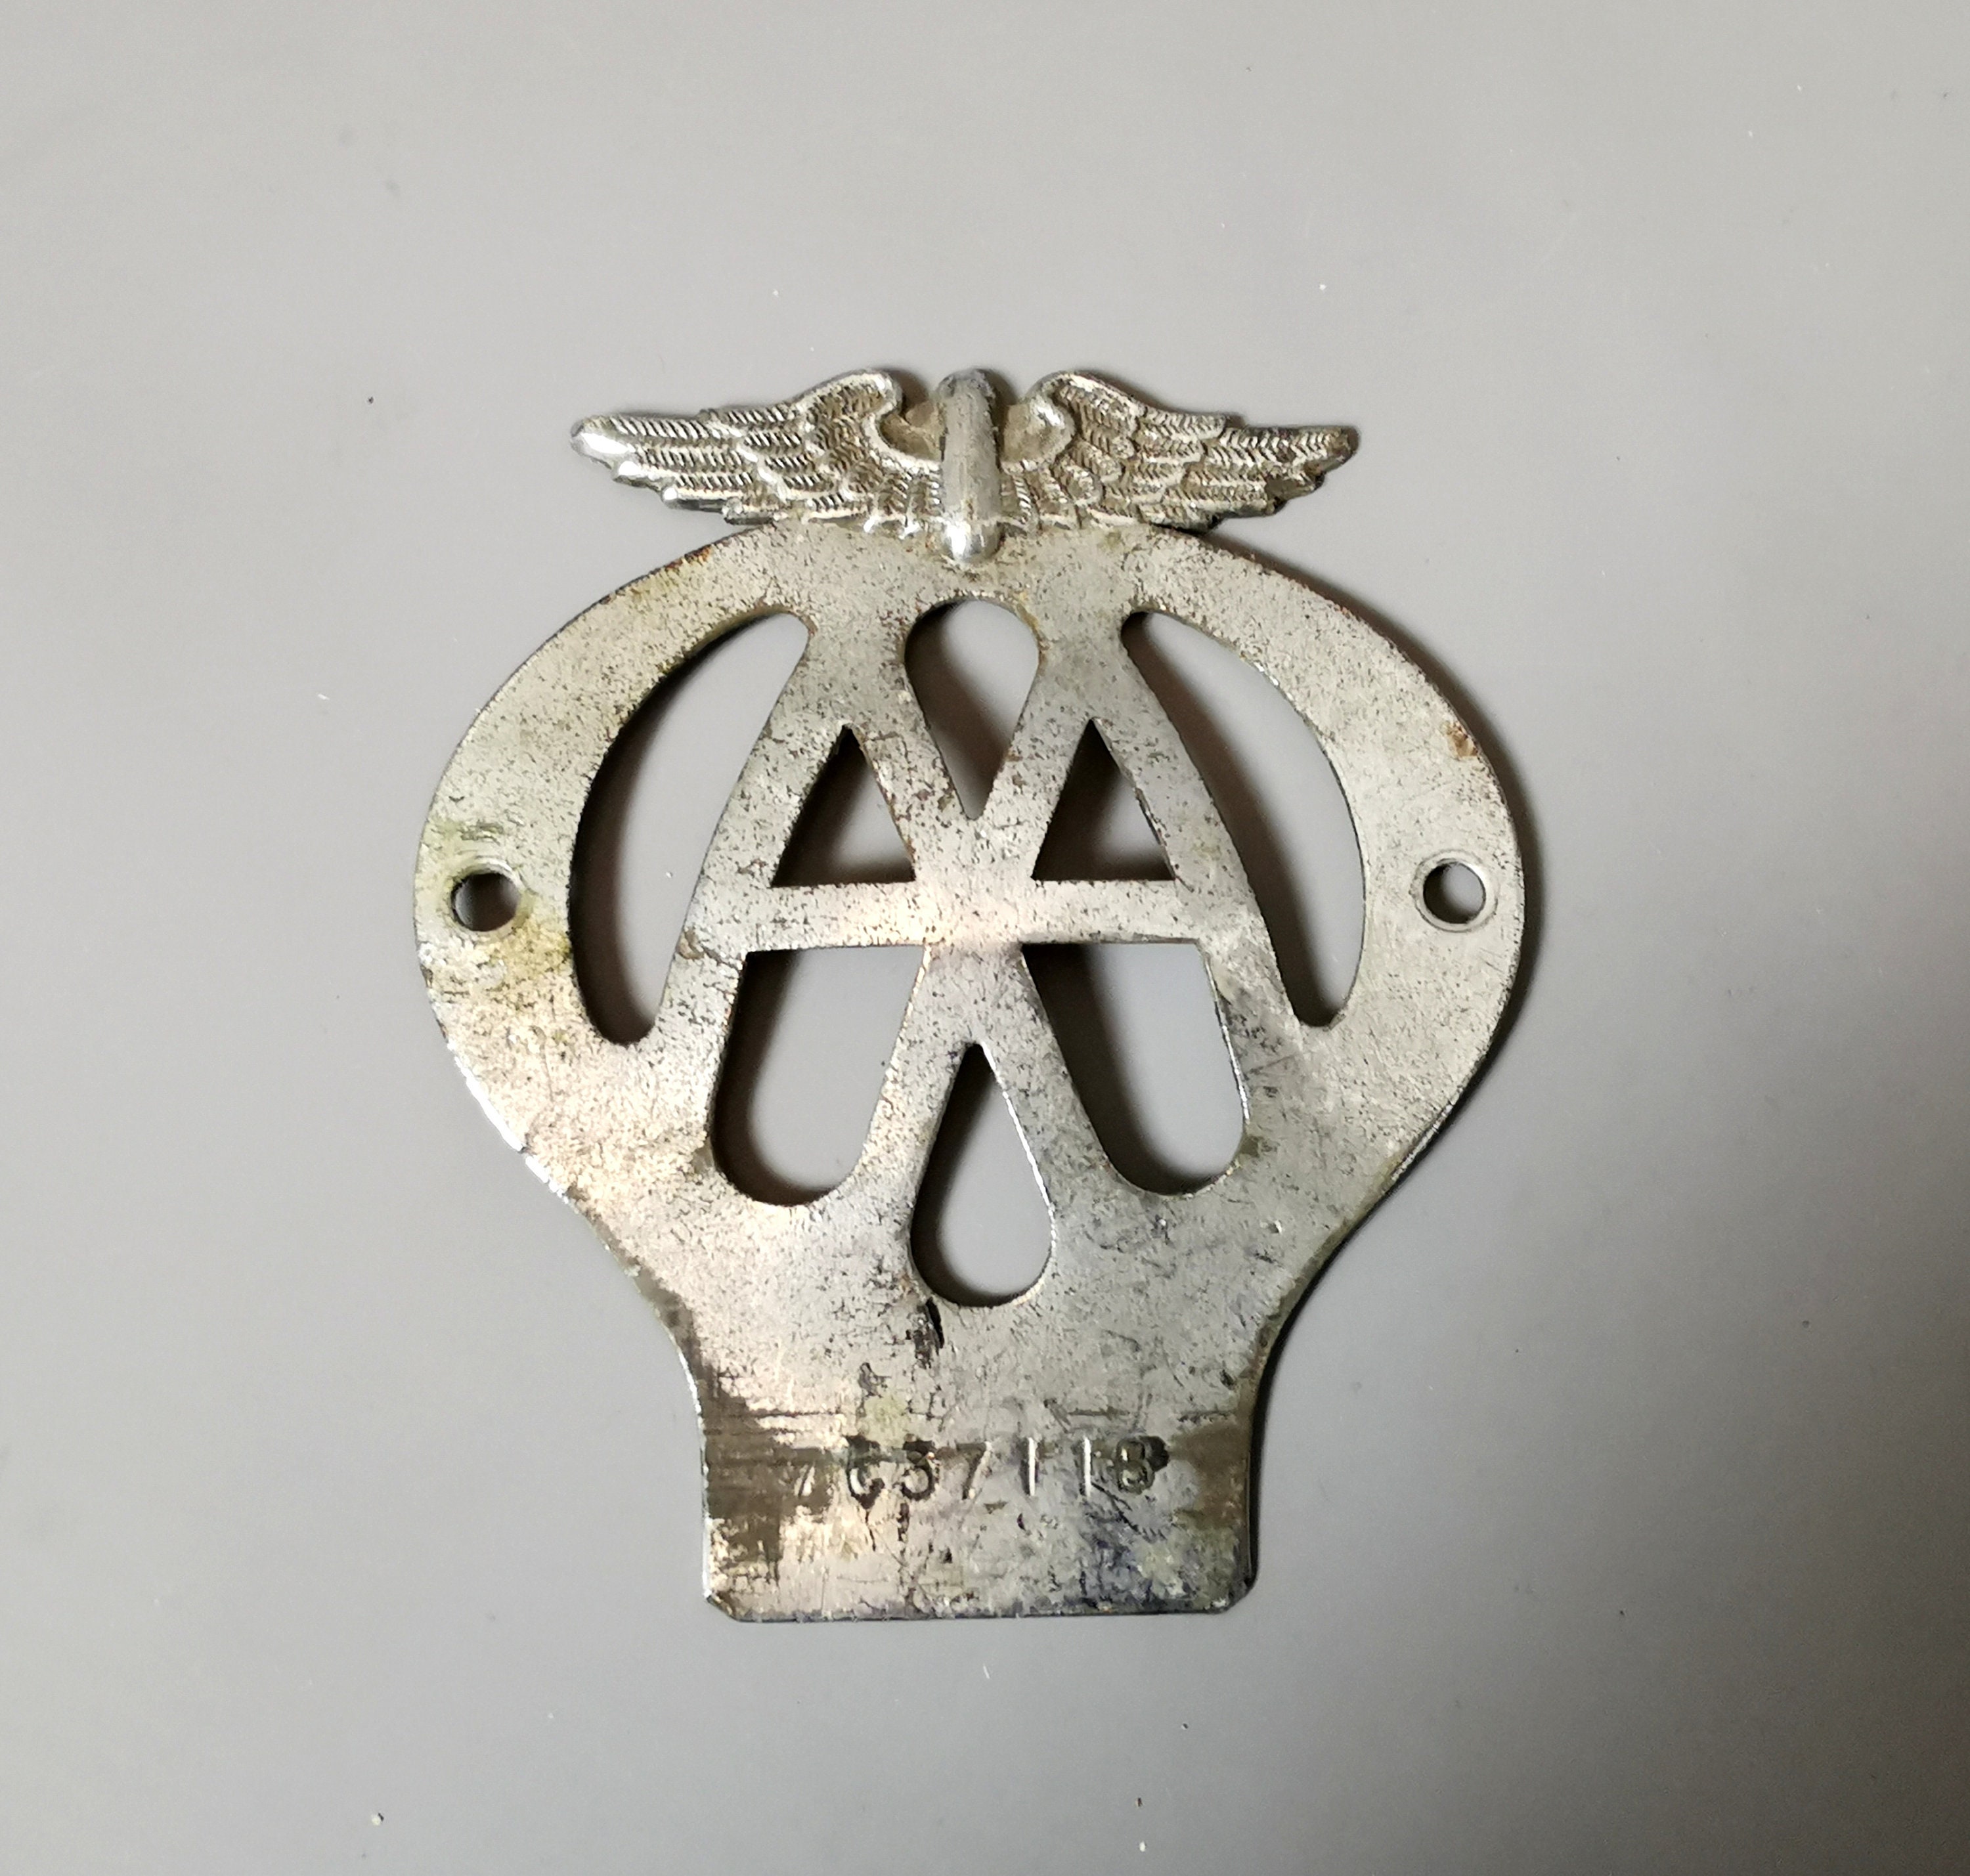 CLASSIC AA CAR BADGE SERIAL NUMBER 6E 2046 IN GREAT CONDITION 6 off 